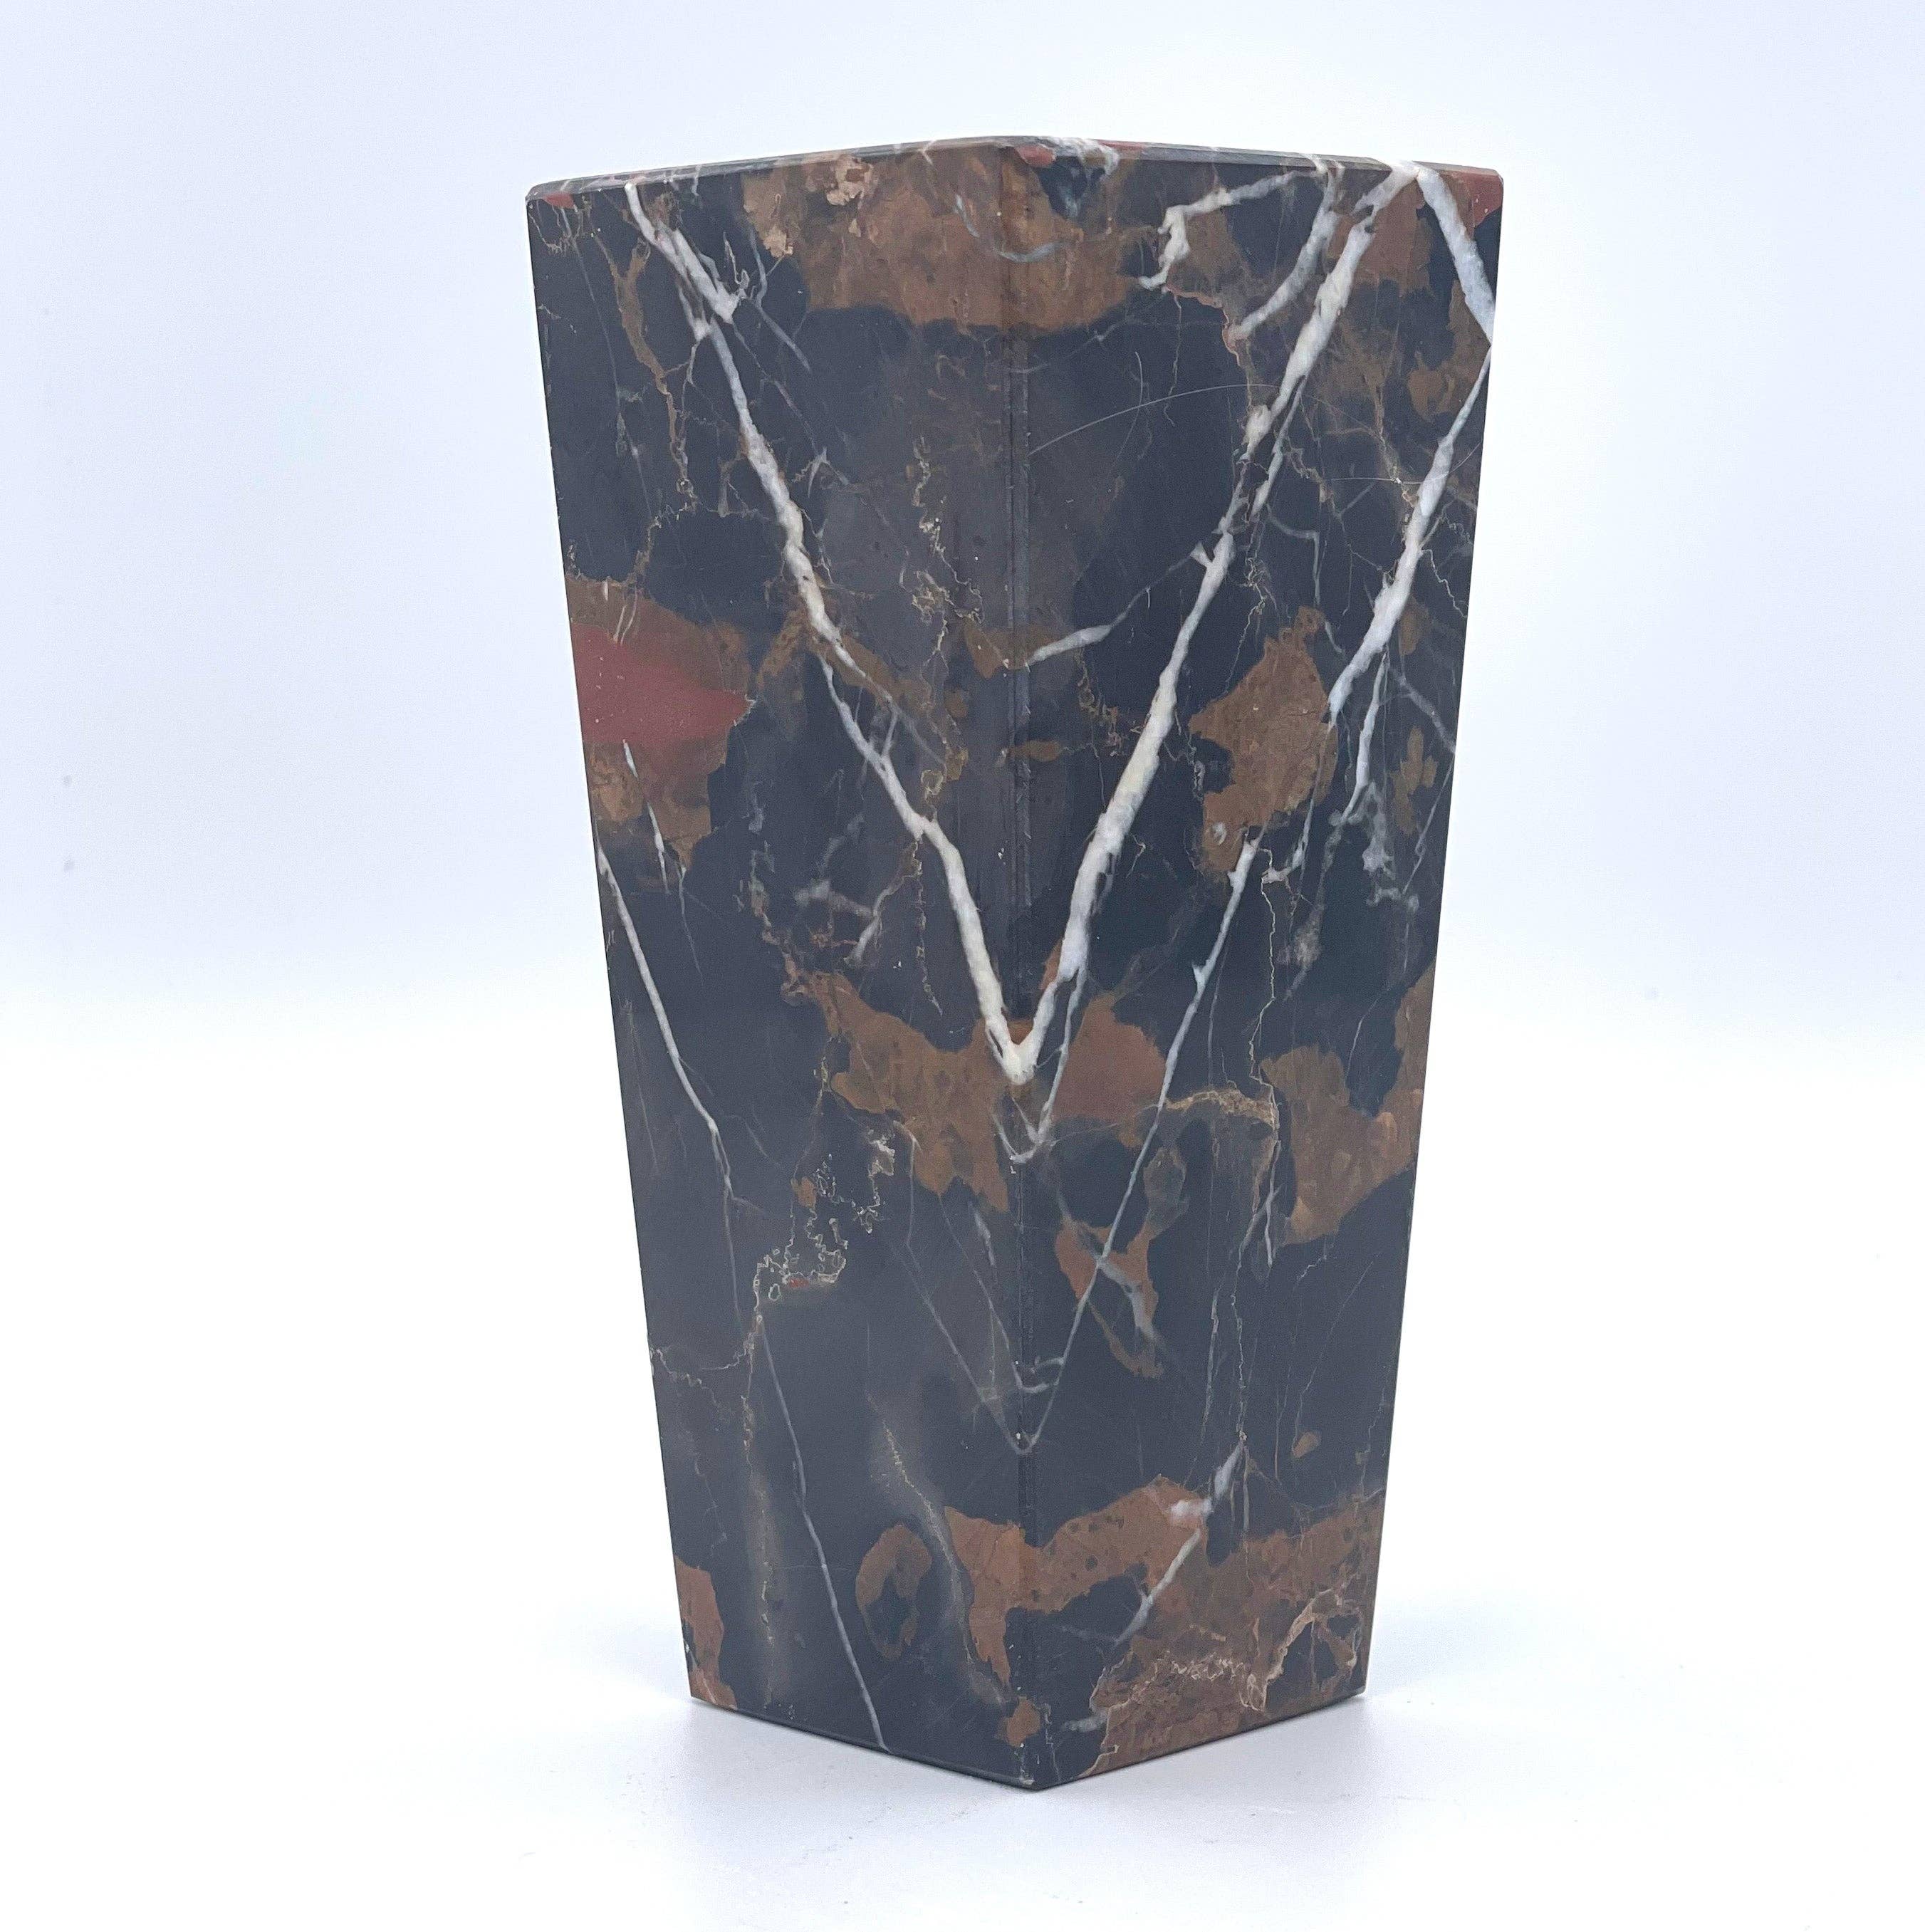 6" Square Vase - Marble and Onyx: Black and Gold Marble